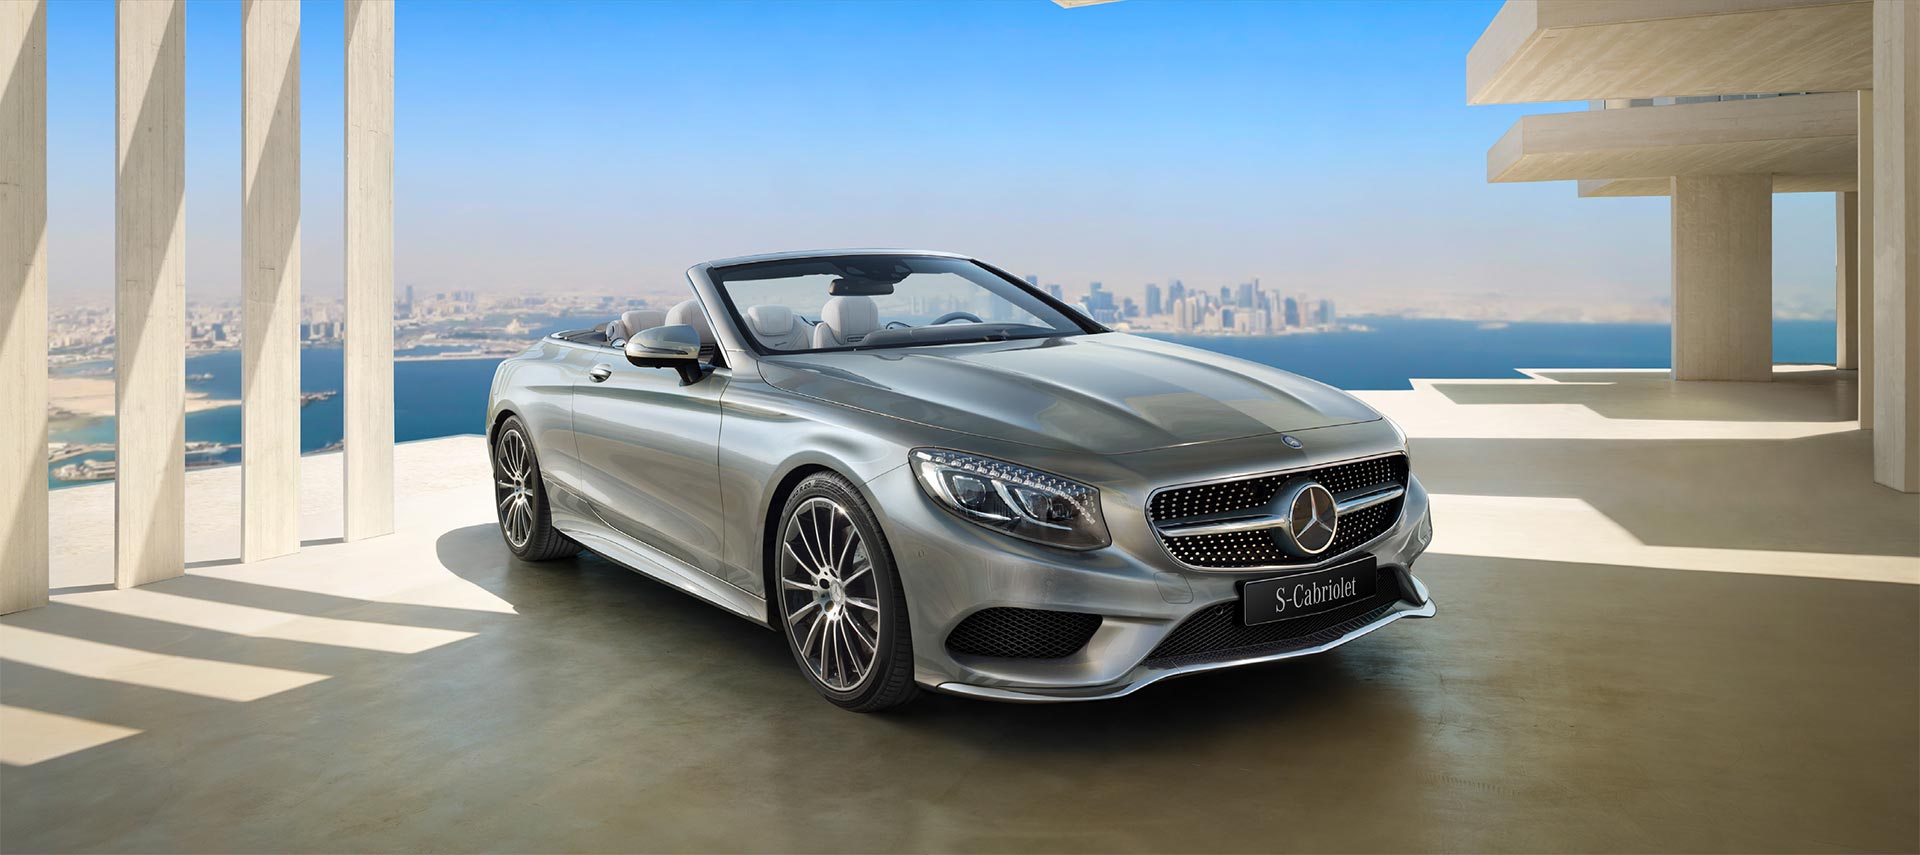 Limited time offer from Nasser Bin Khaled on the Mercedes-Benz S-Class